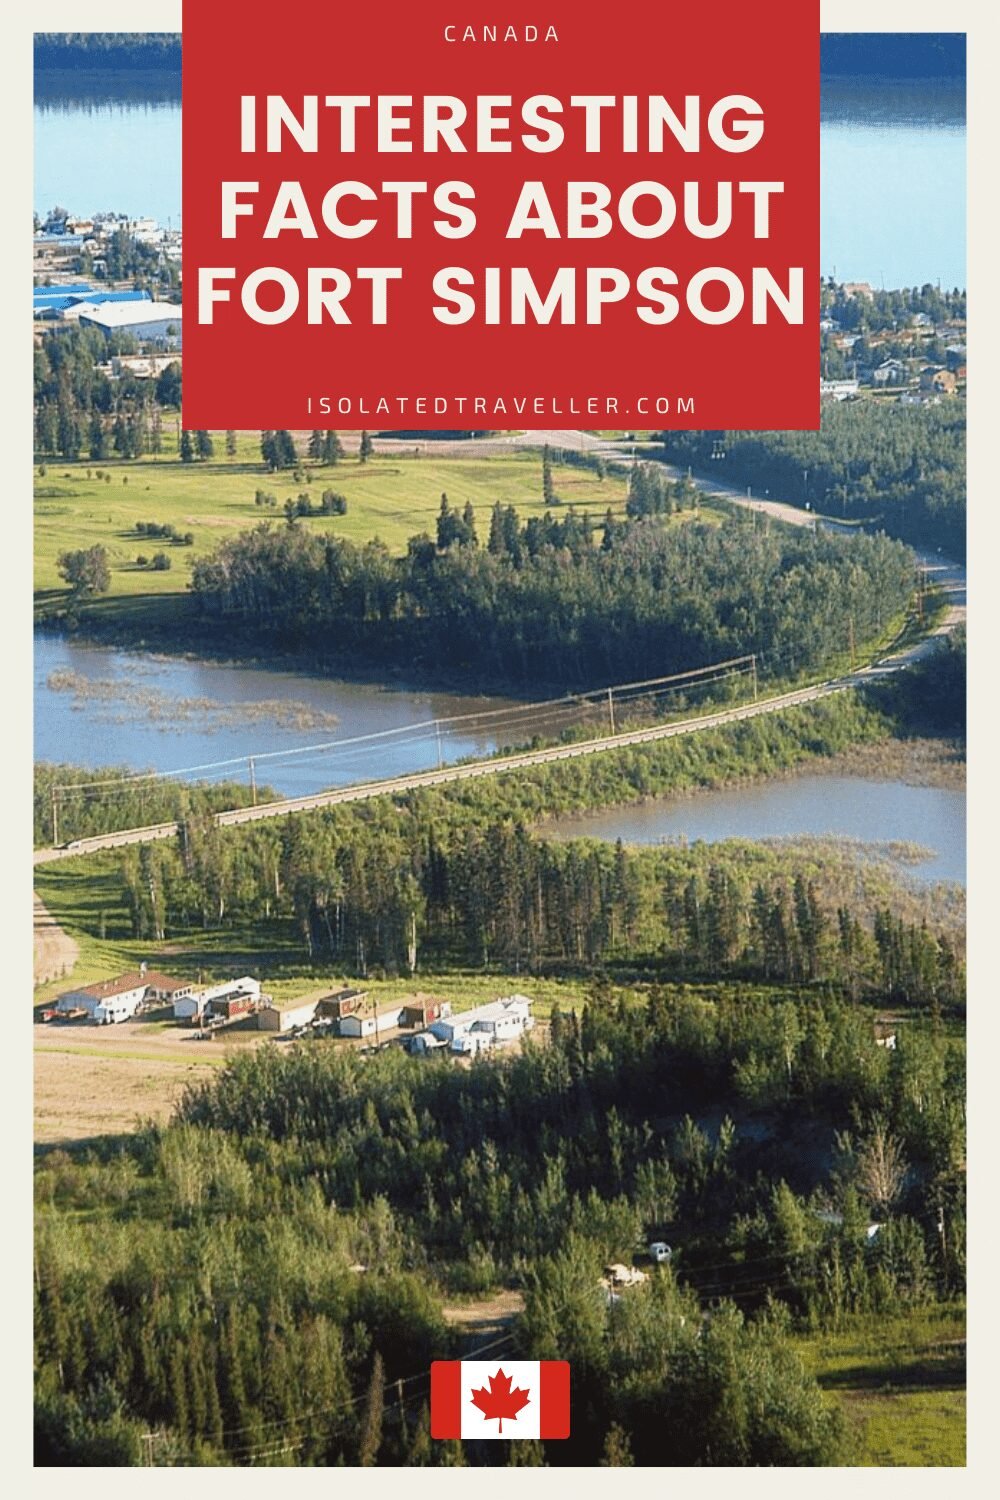 Facts About Fort Simpson